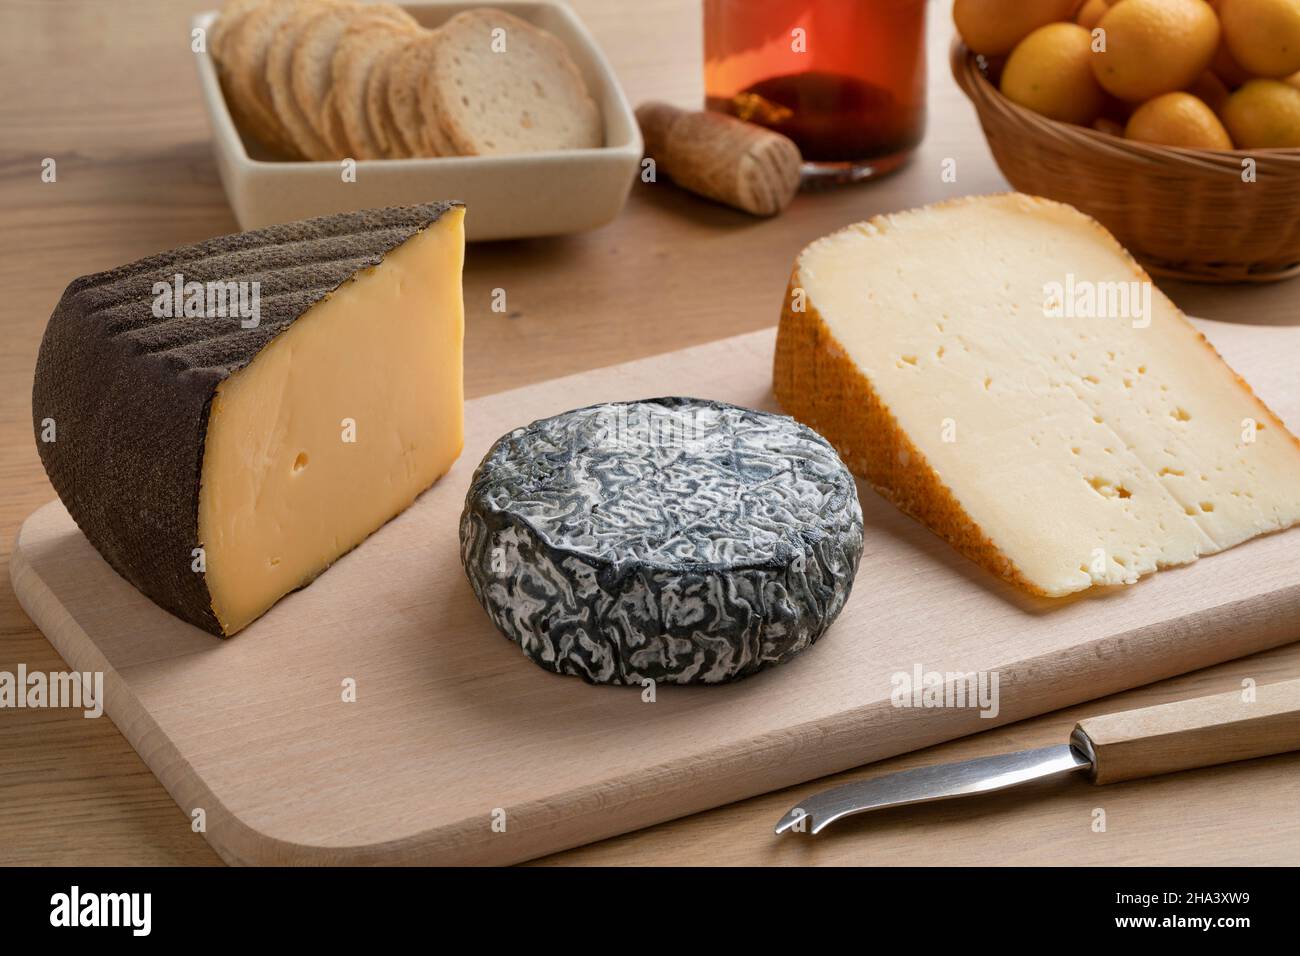 French cheese platter with three different types of cheese as dessert Stock Photo